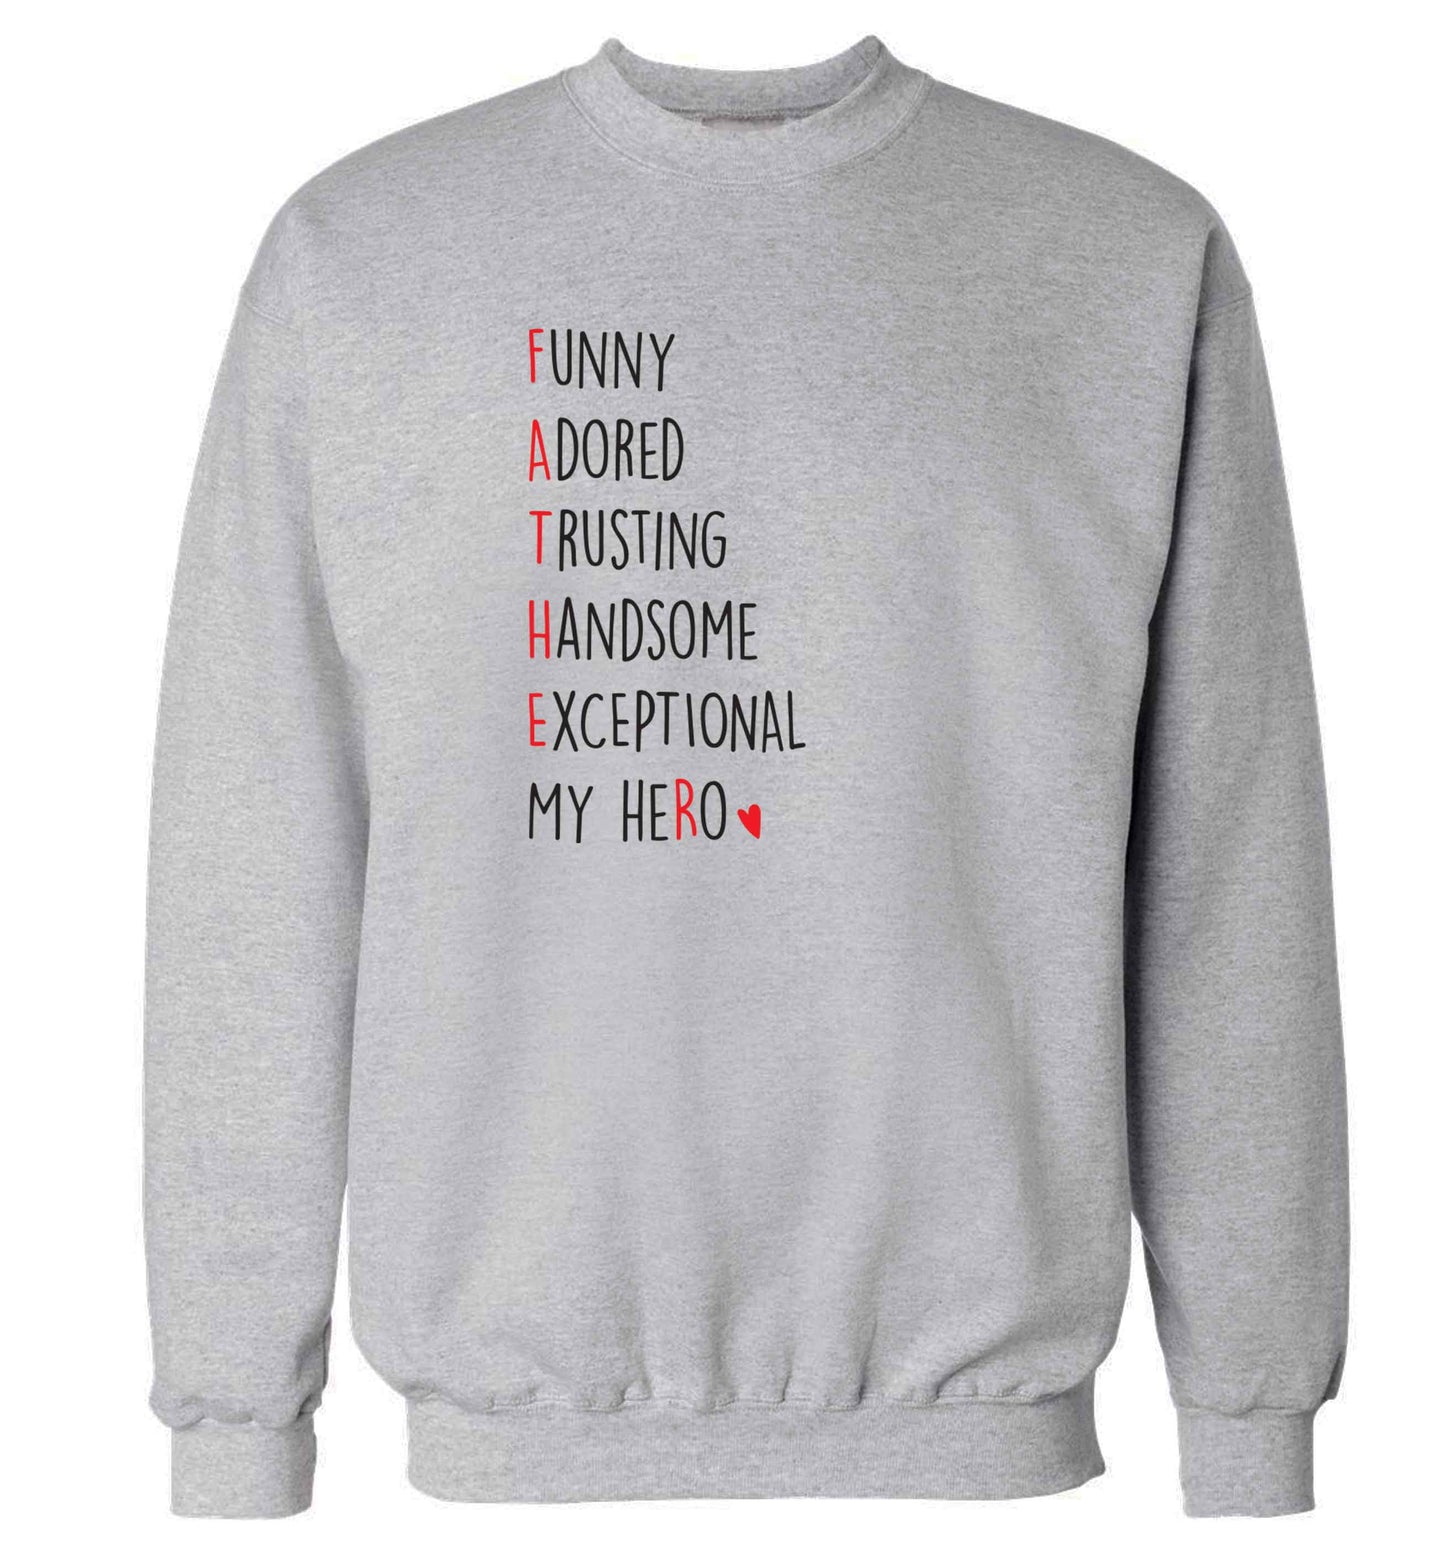 Father meaning hero acrostic poem adult's unisex grey sweater 2XL